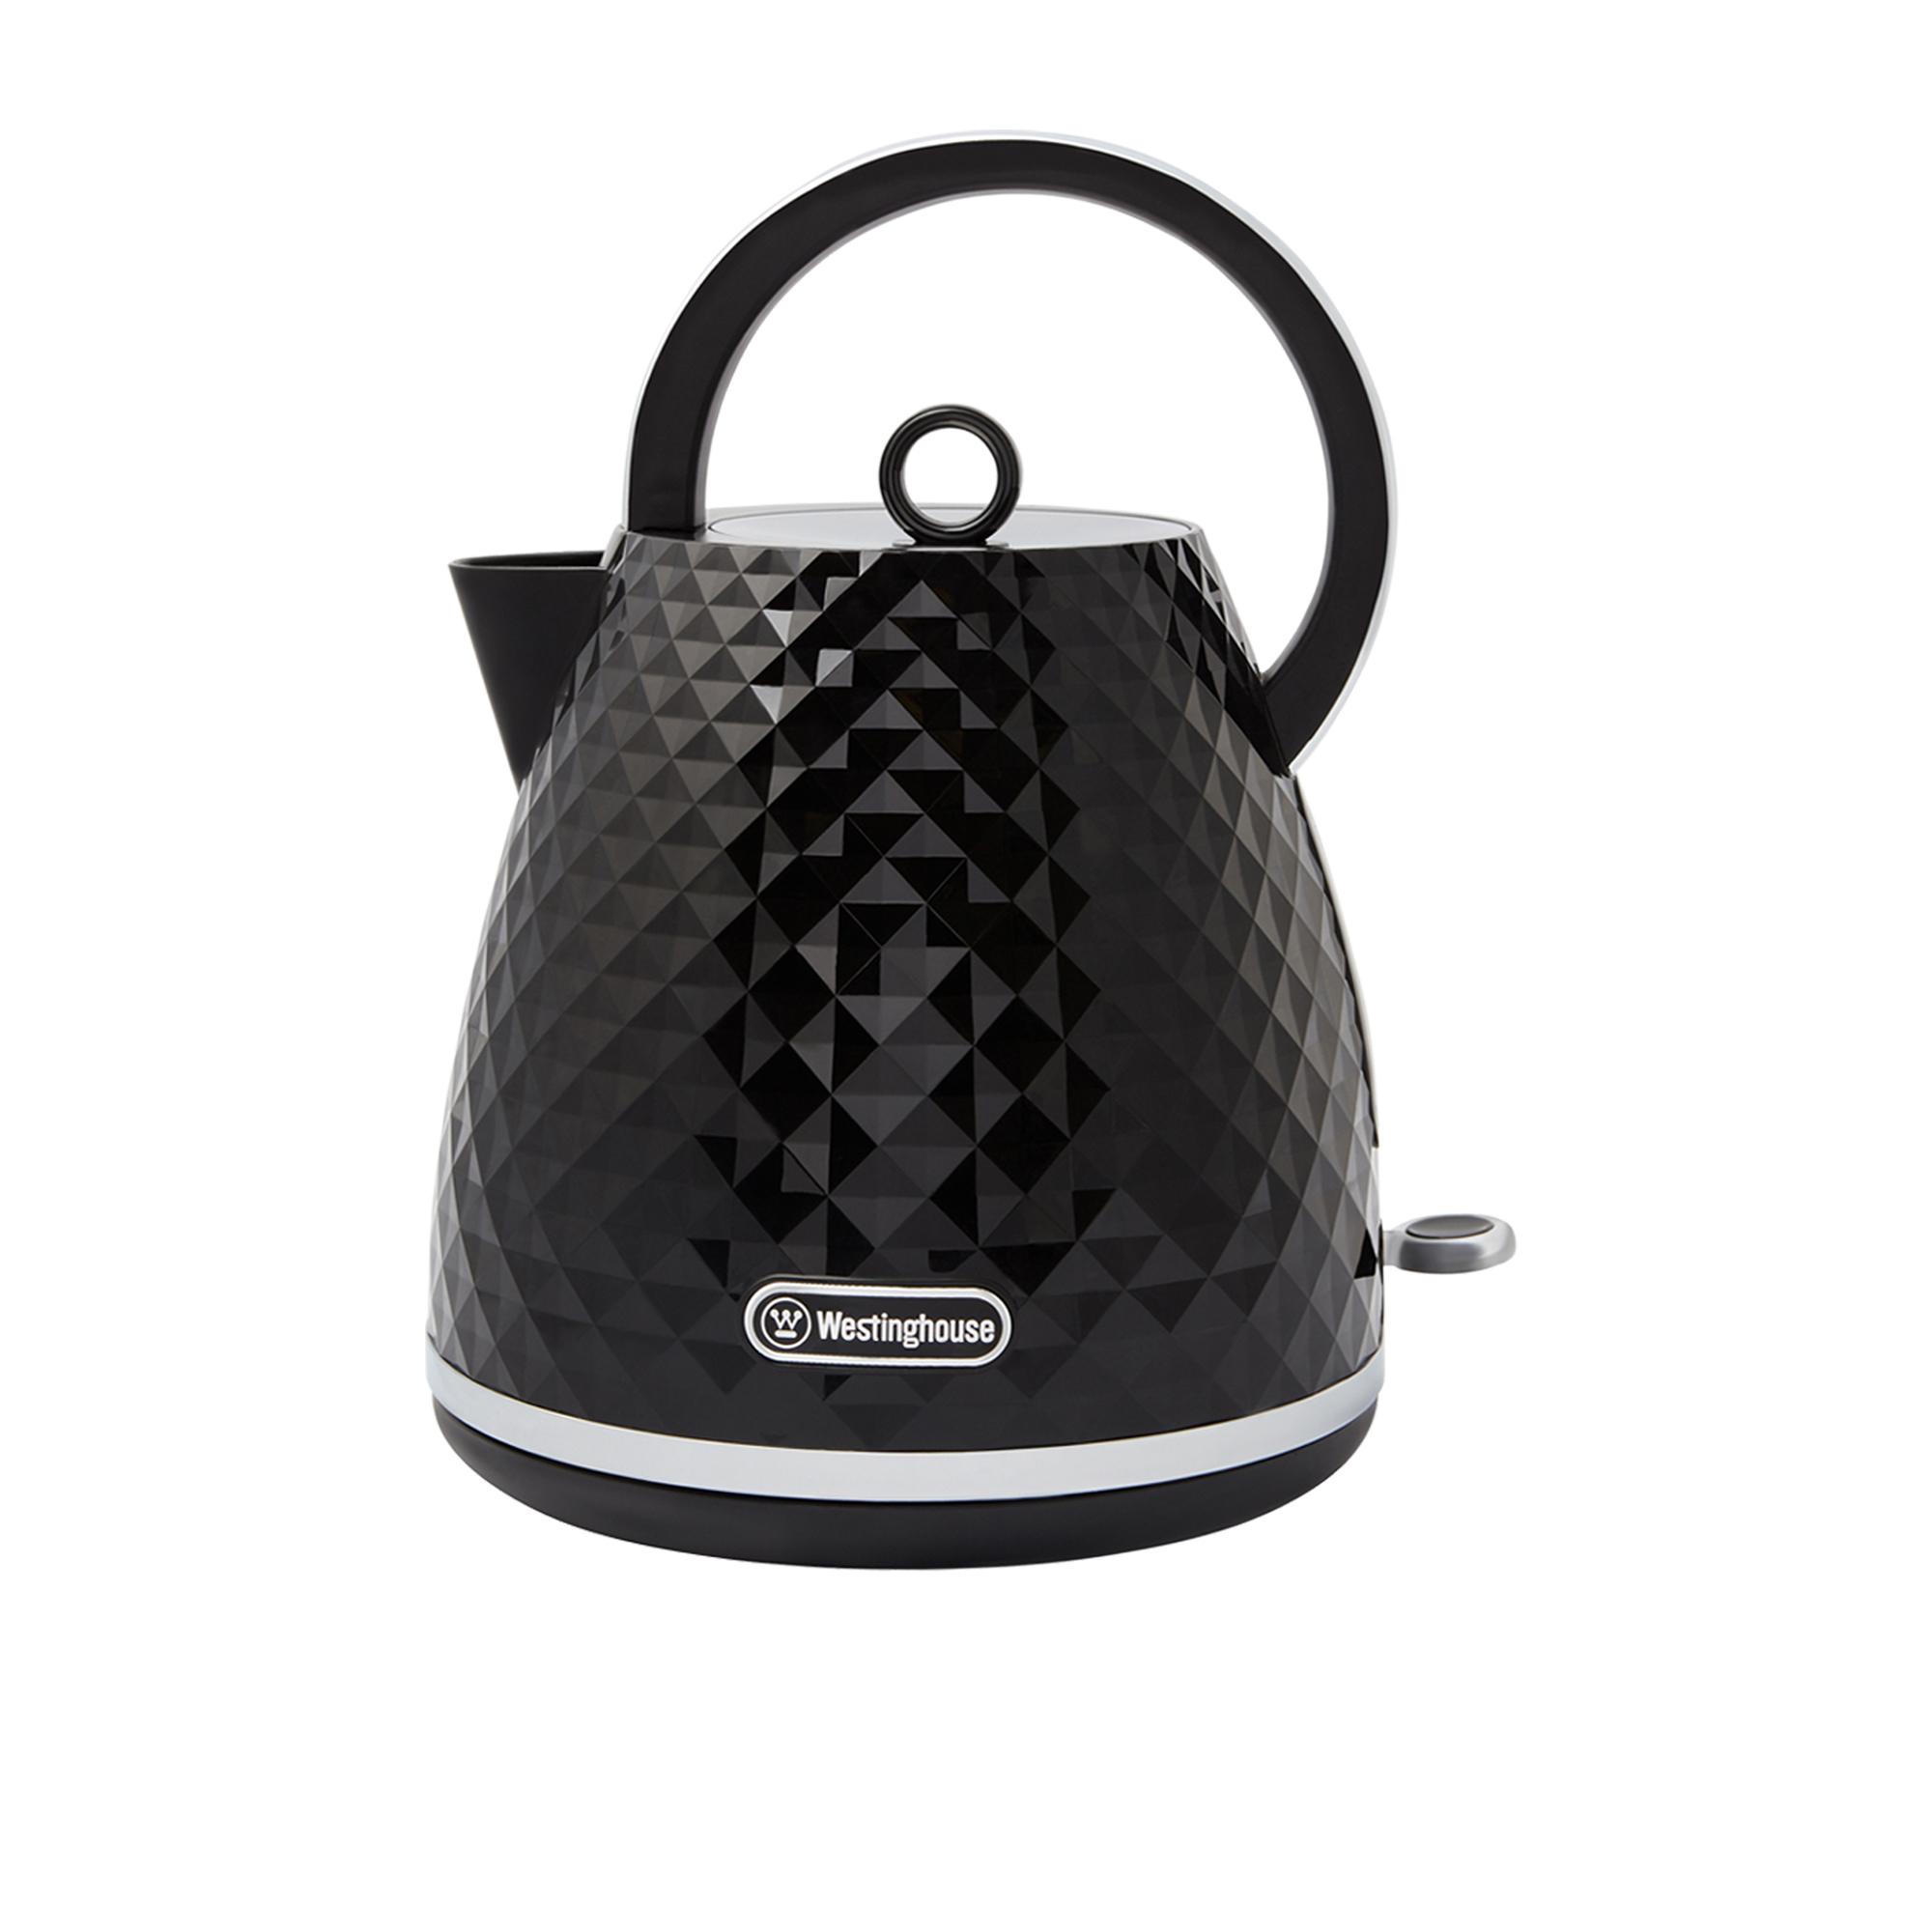 Westinghouse Kettle and Toaster Pack Black - Diamond Pattern Image 3